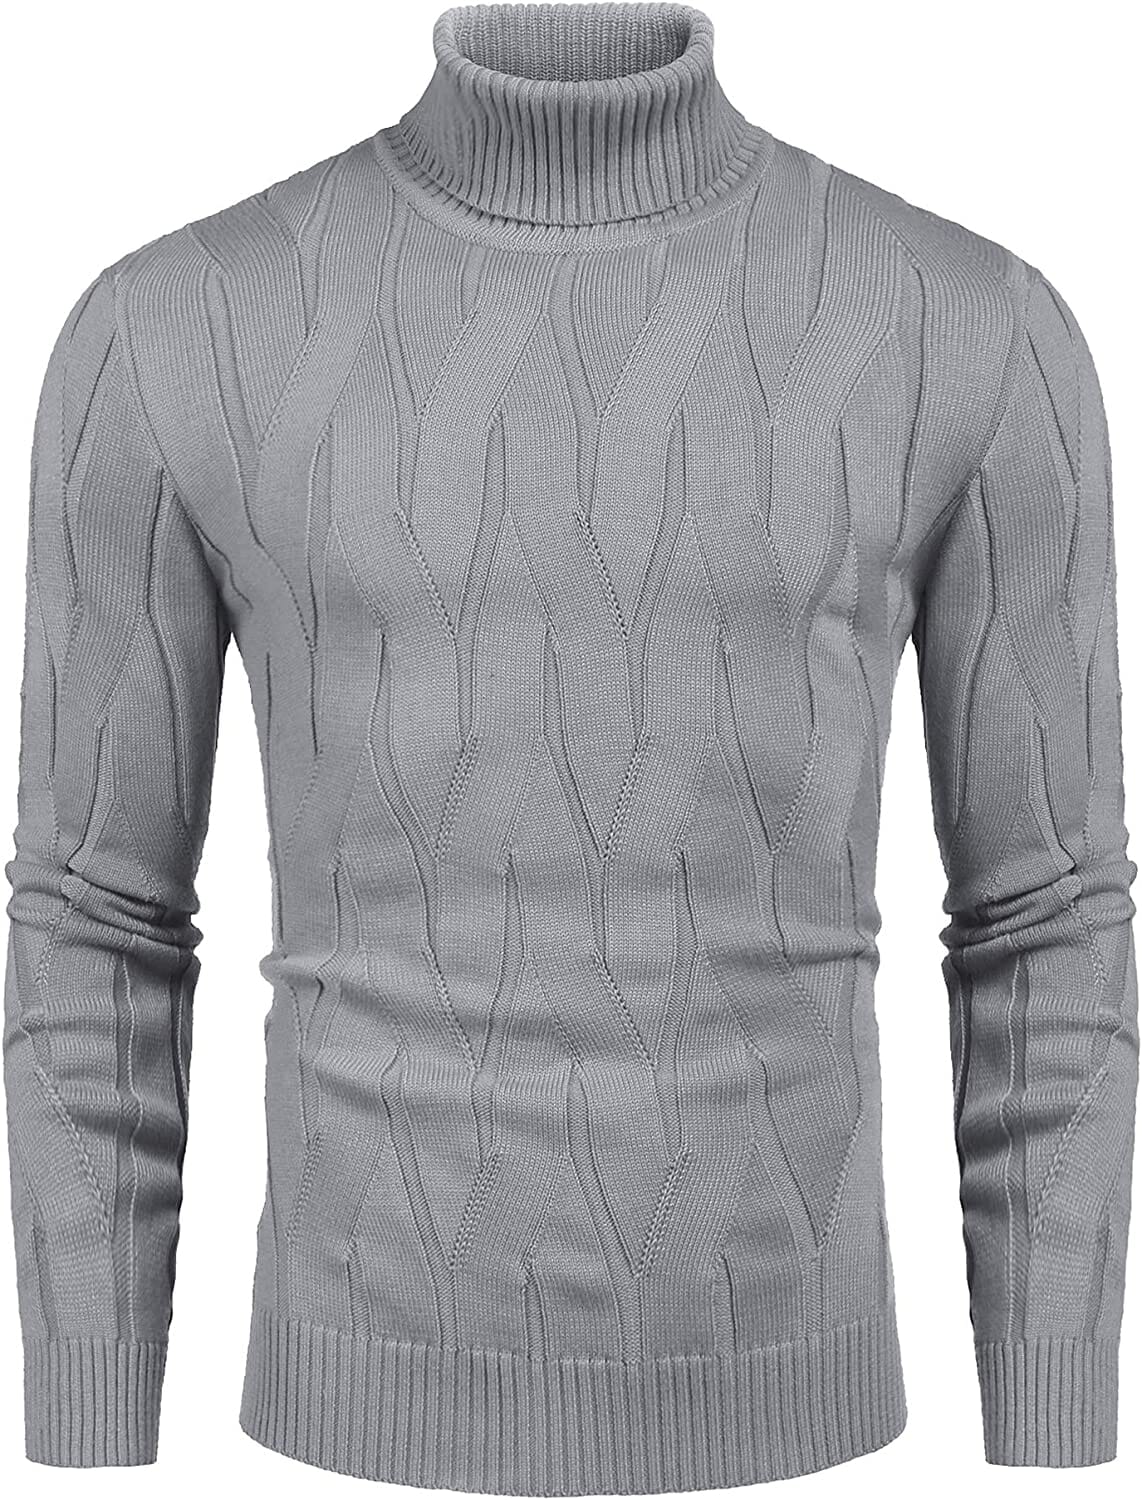 Slim Fit Turtleneck Knitted Pullover Sweaters (US Only) Sweaters Coofandy's Grey S 